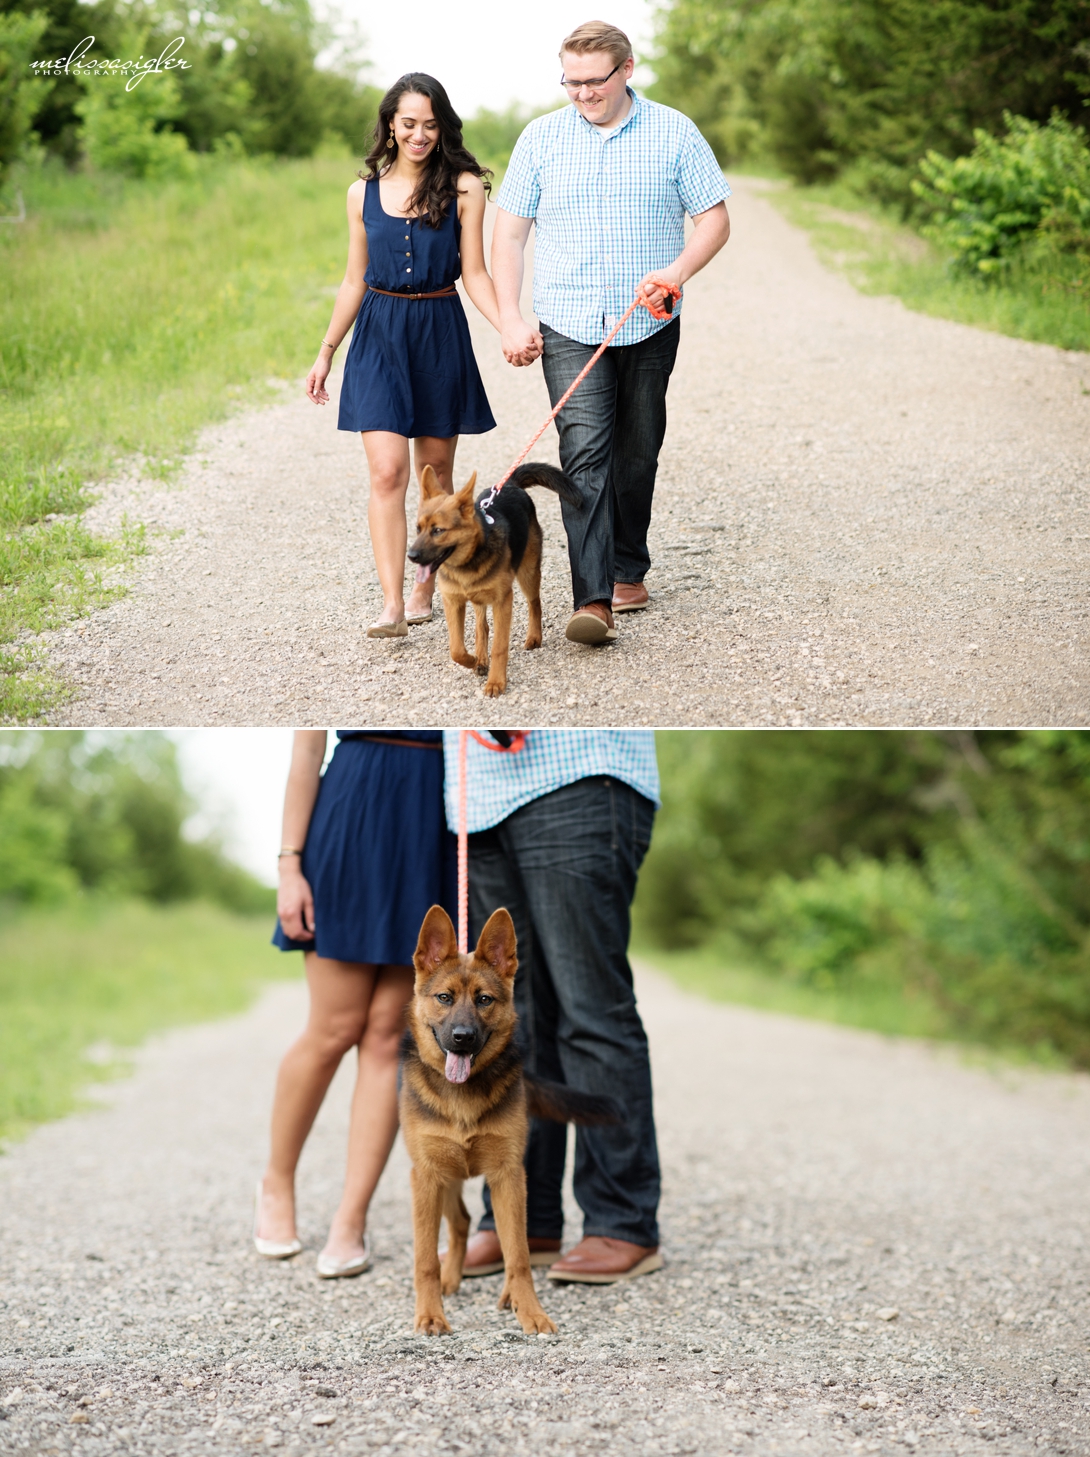 Engagement photos with pets